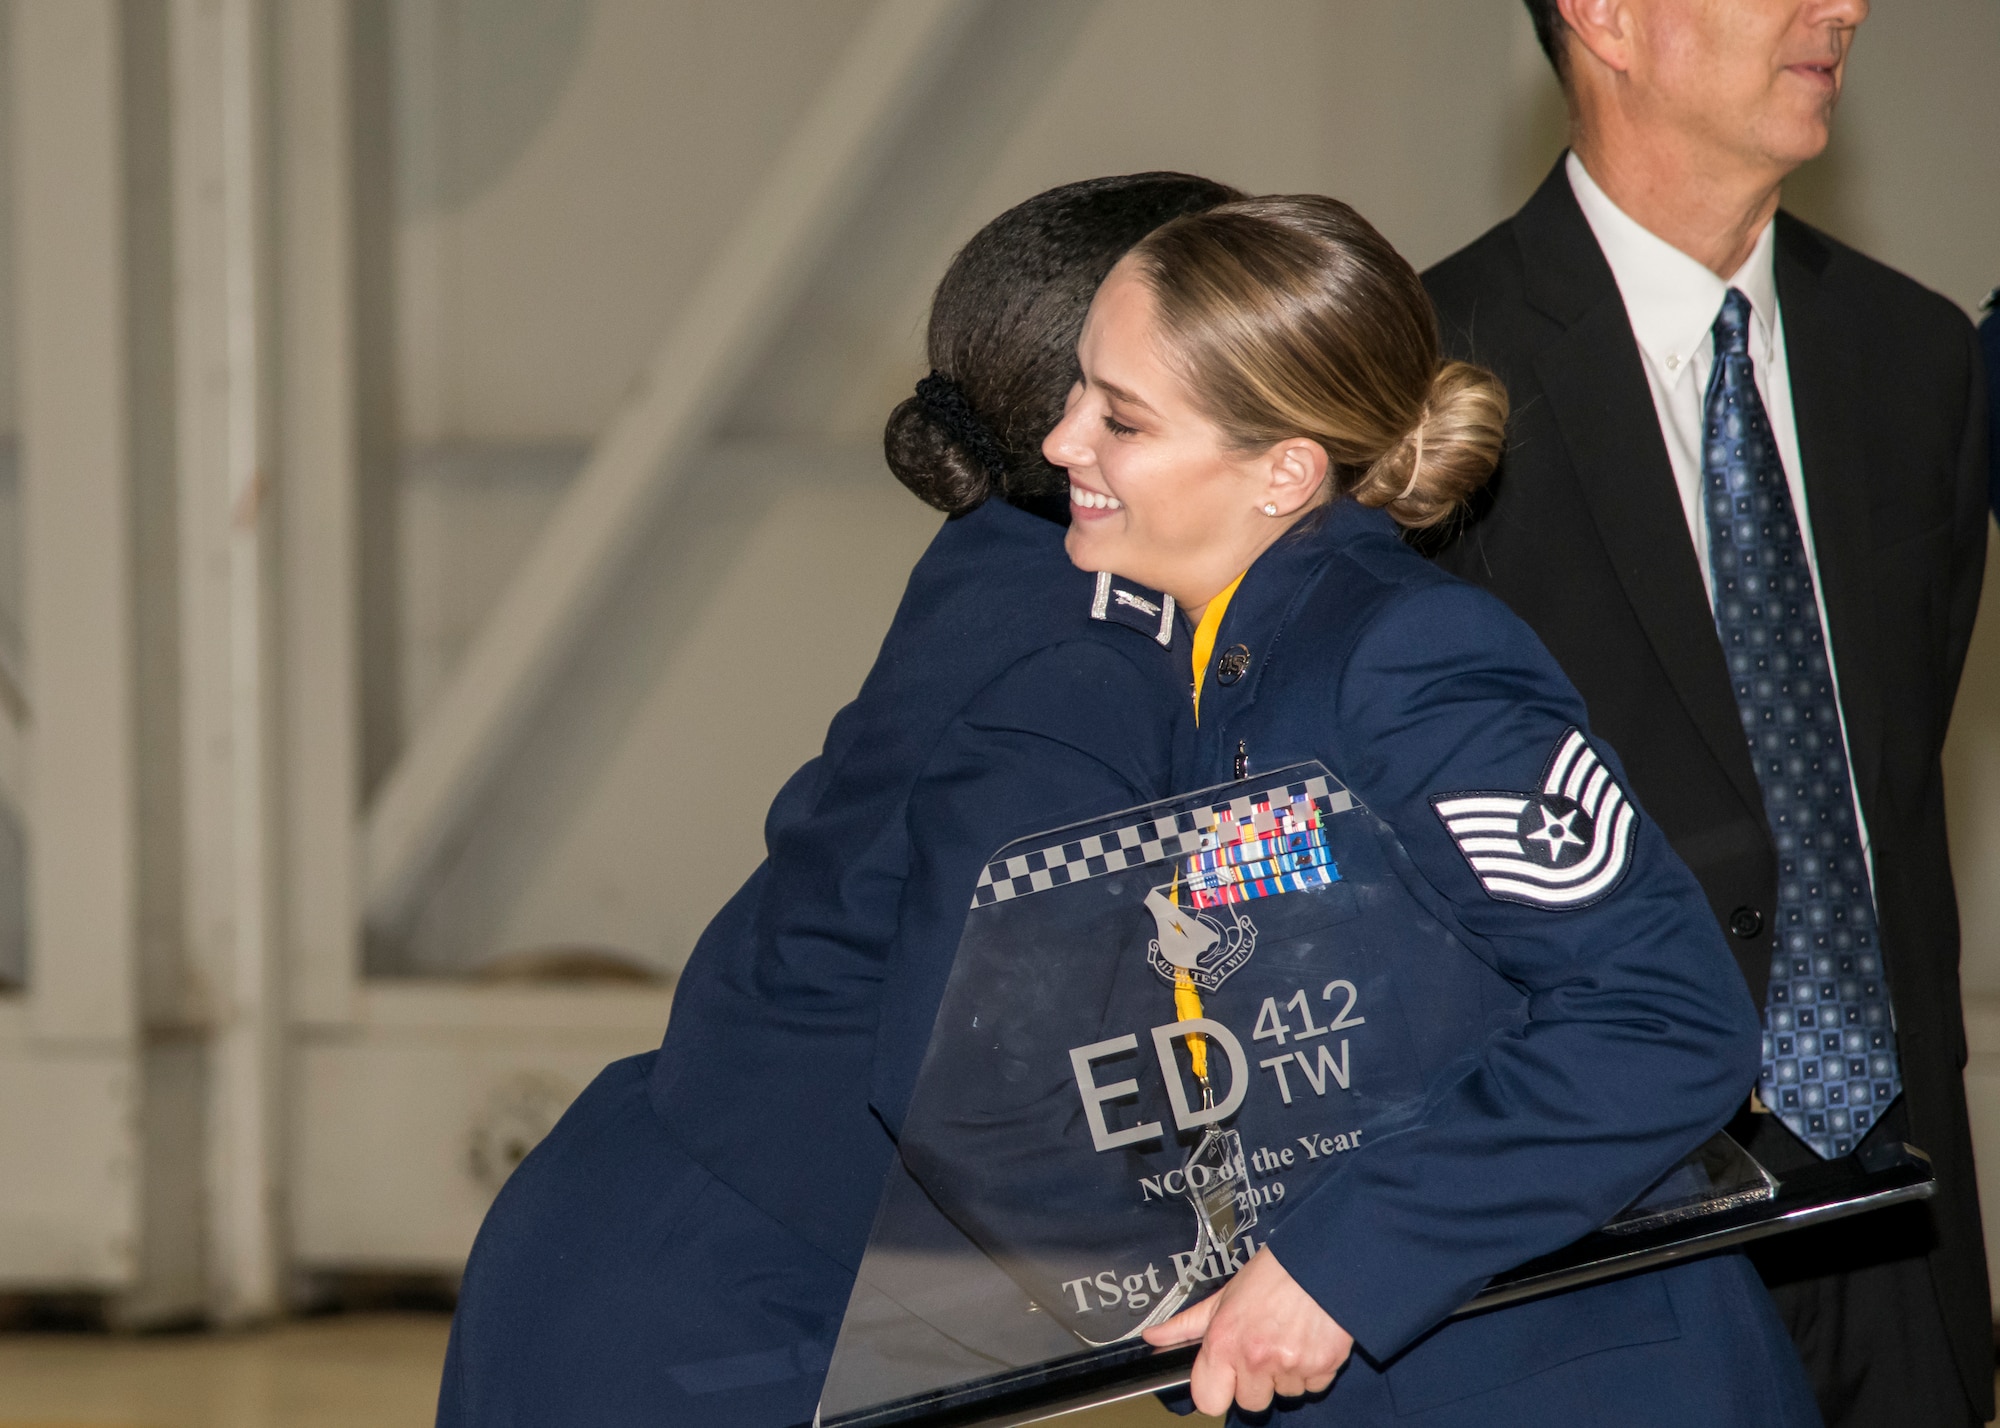 Tech. Sgt. Rikki Glowacki, the Noncomissioned Officer of the Year winner, is congratulated by her group commander, Col. Gwendolyn Foster, 412th Medical Group Commander, during the 412th Test Wing's Annual Awards Banquet, at Edwards Air Force Base, California, Jan. 31. (Air Force photo by Giancarlo Casem)